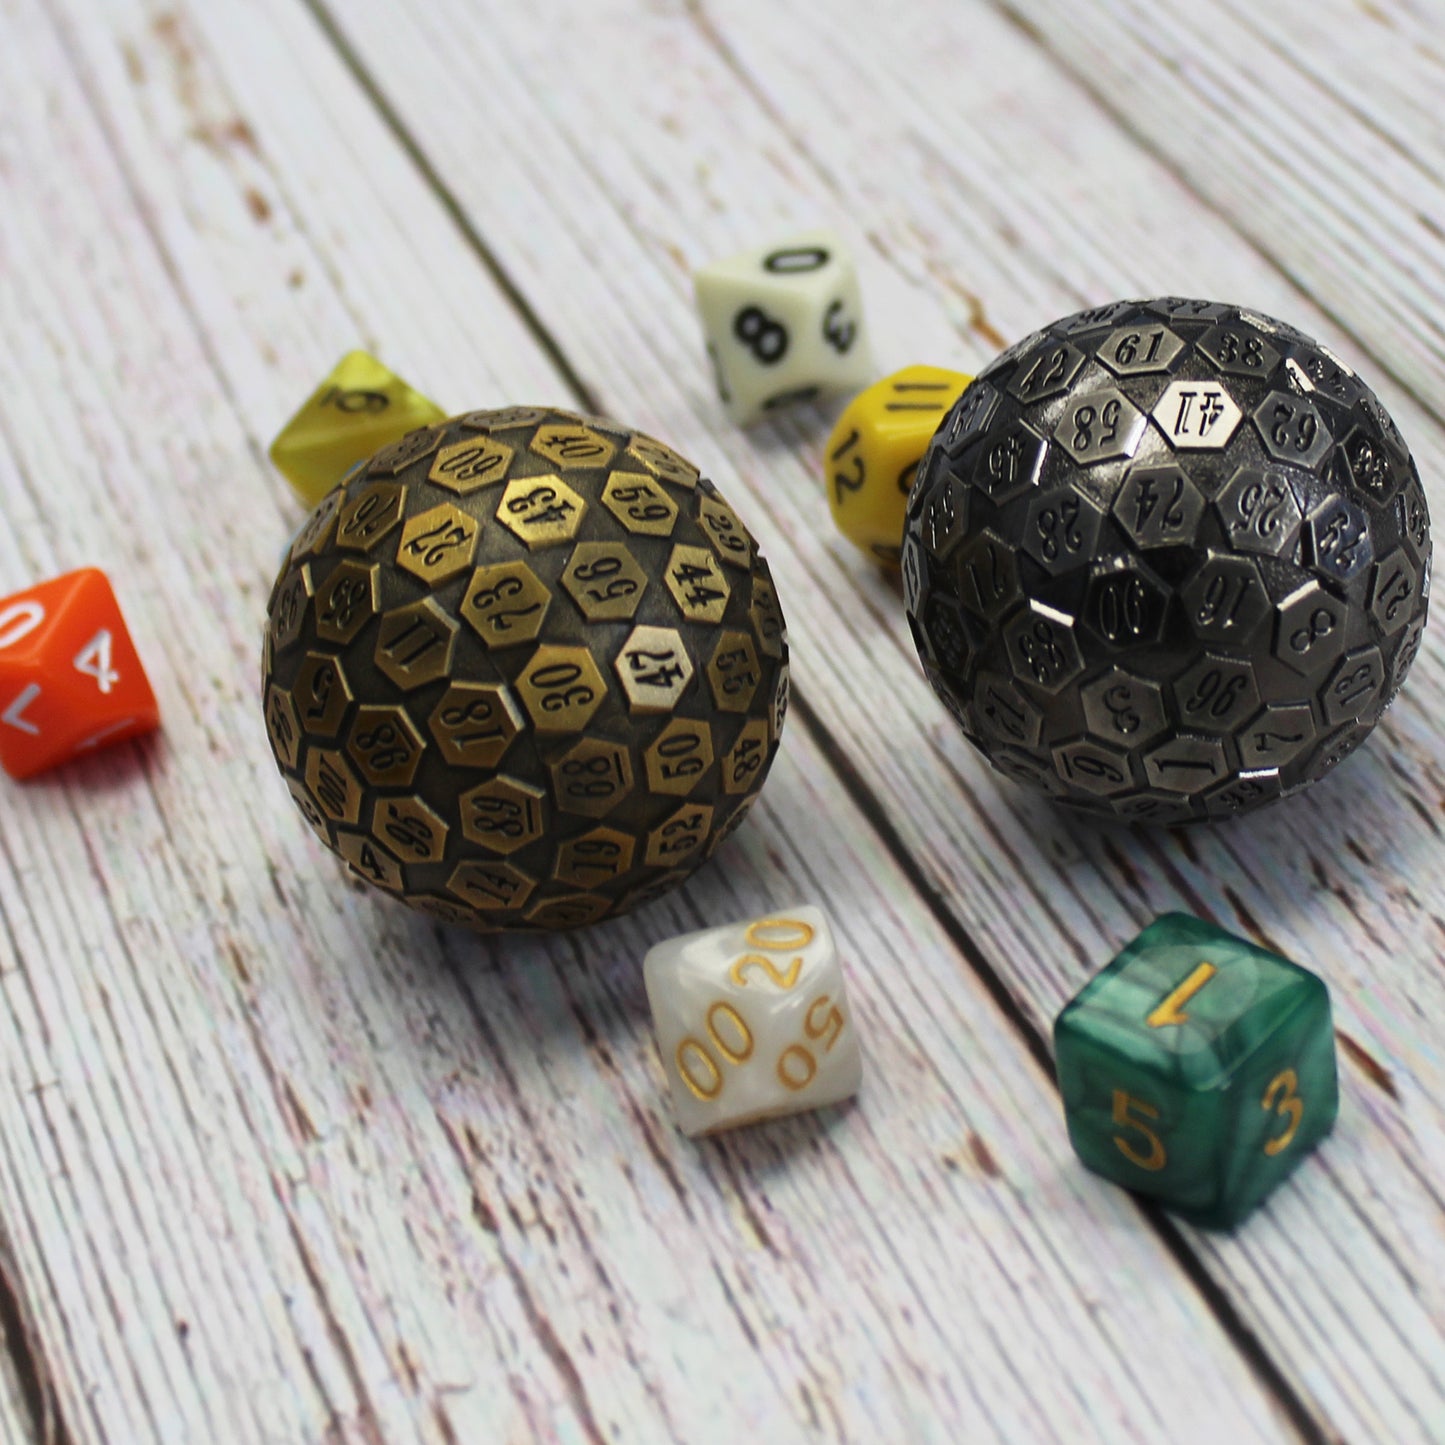 jumbo metal d100s available in two antique colors.